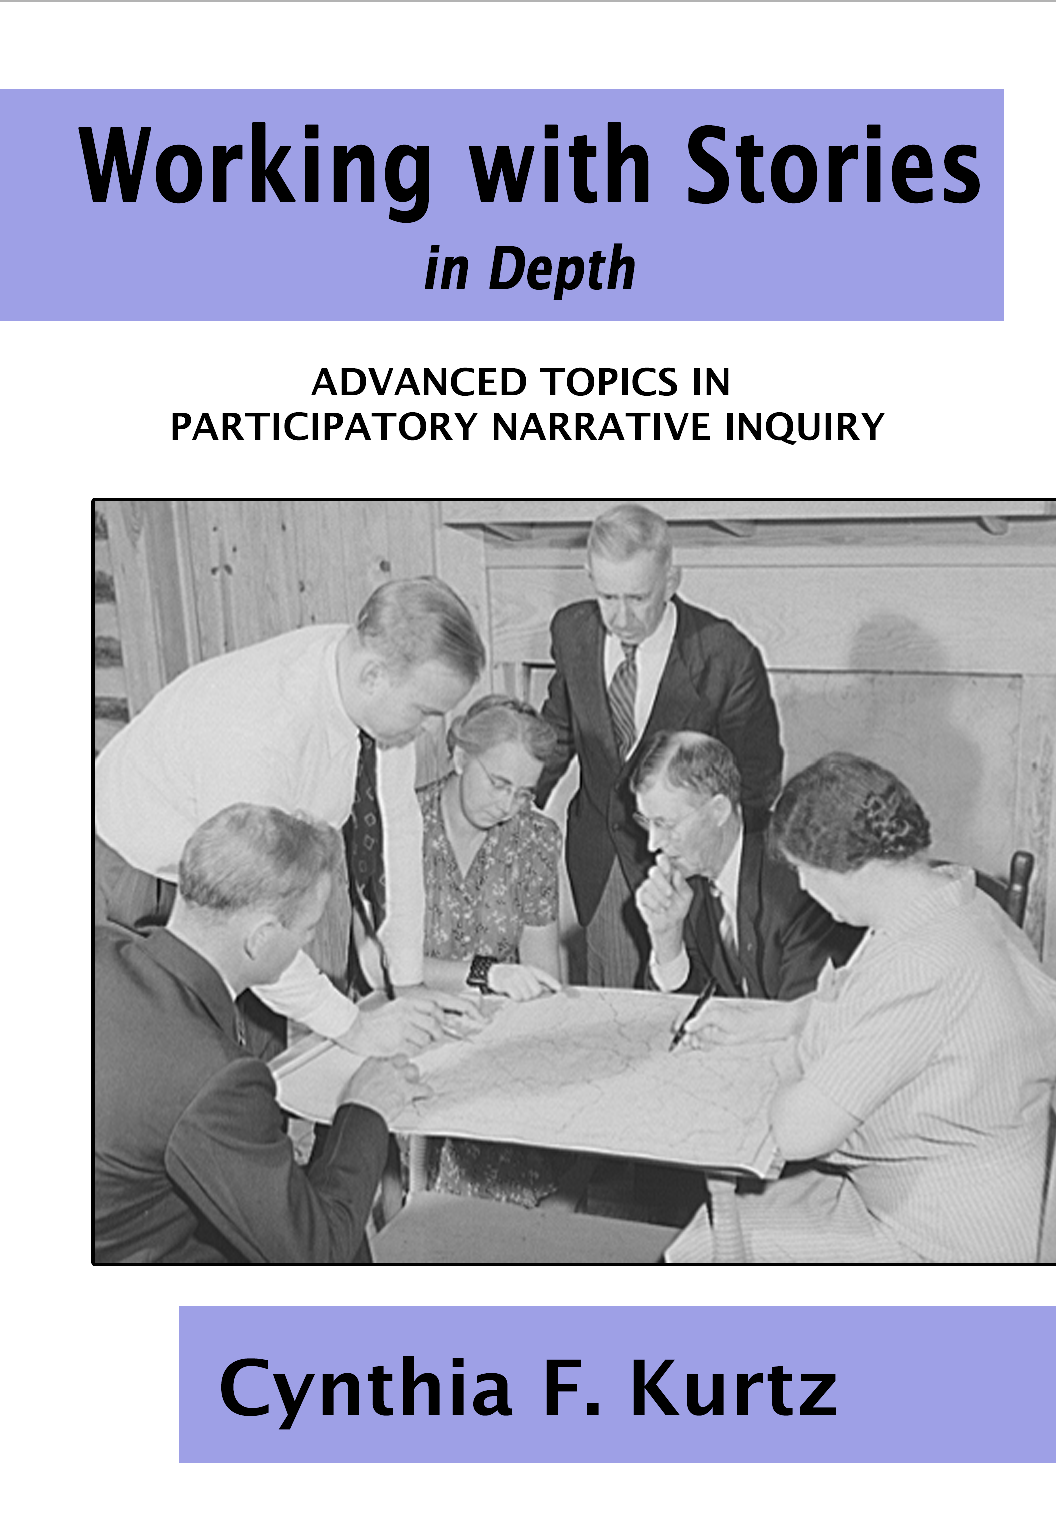 Working with Stories in Depth: Advanced Topics in Participatory Narrative Inquiry